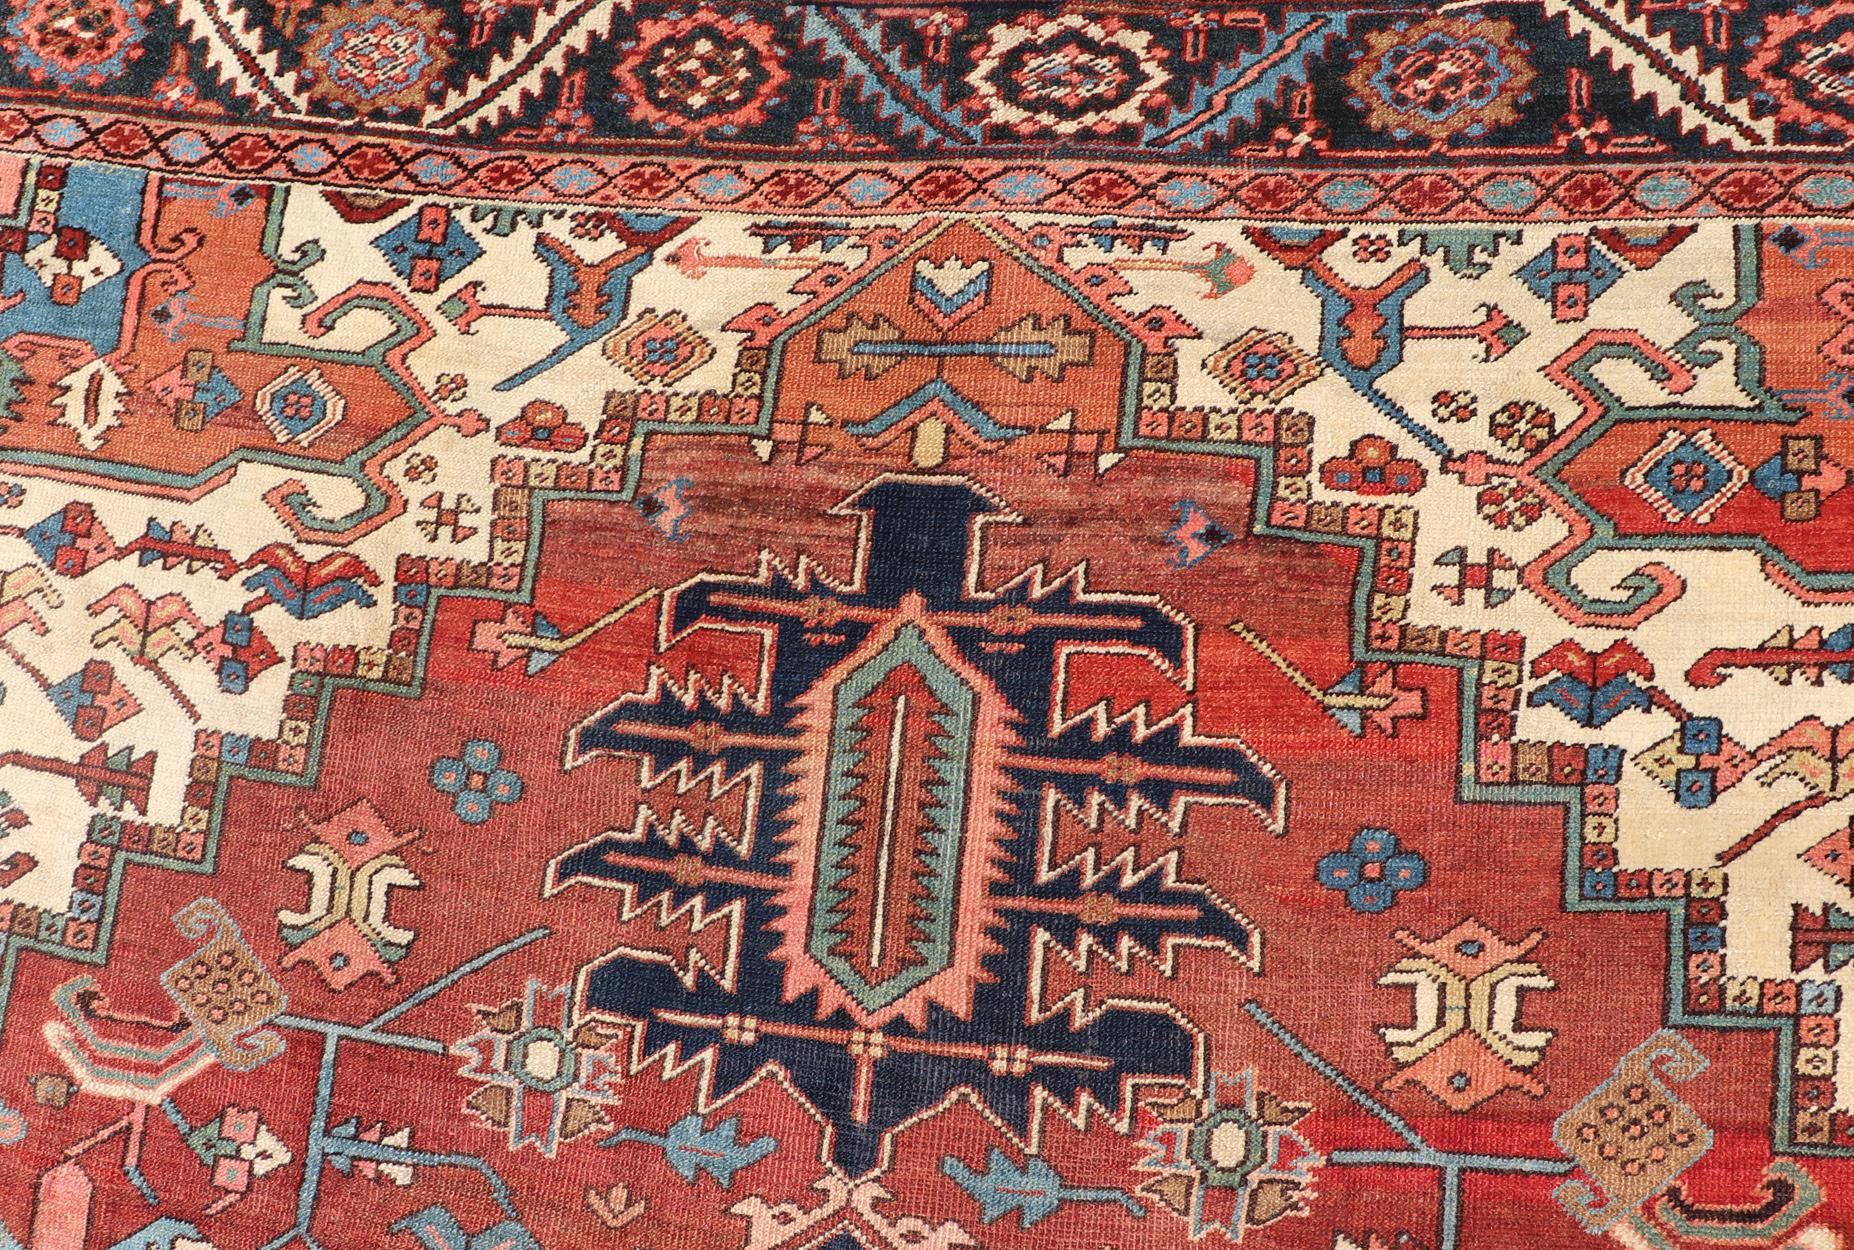 Late 19th Century Early 20th Century Antique Persian Serapi Carpet with Stylized Geometric Motifs For Sale